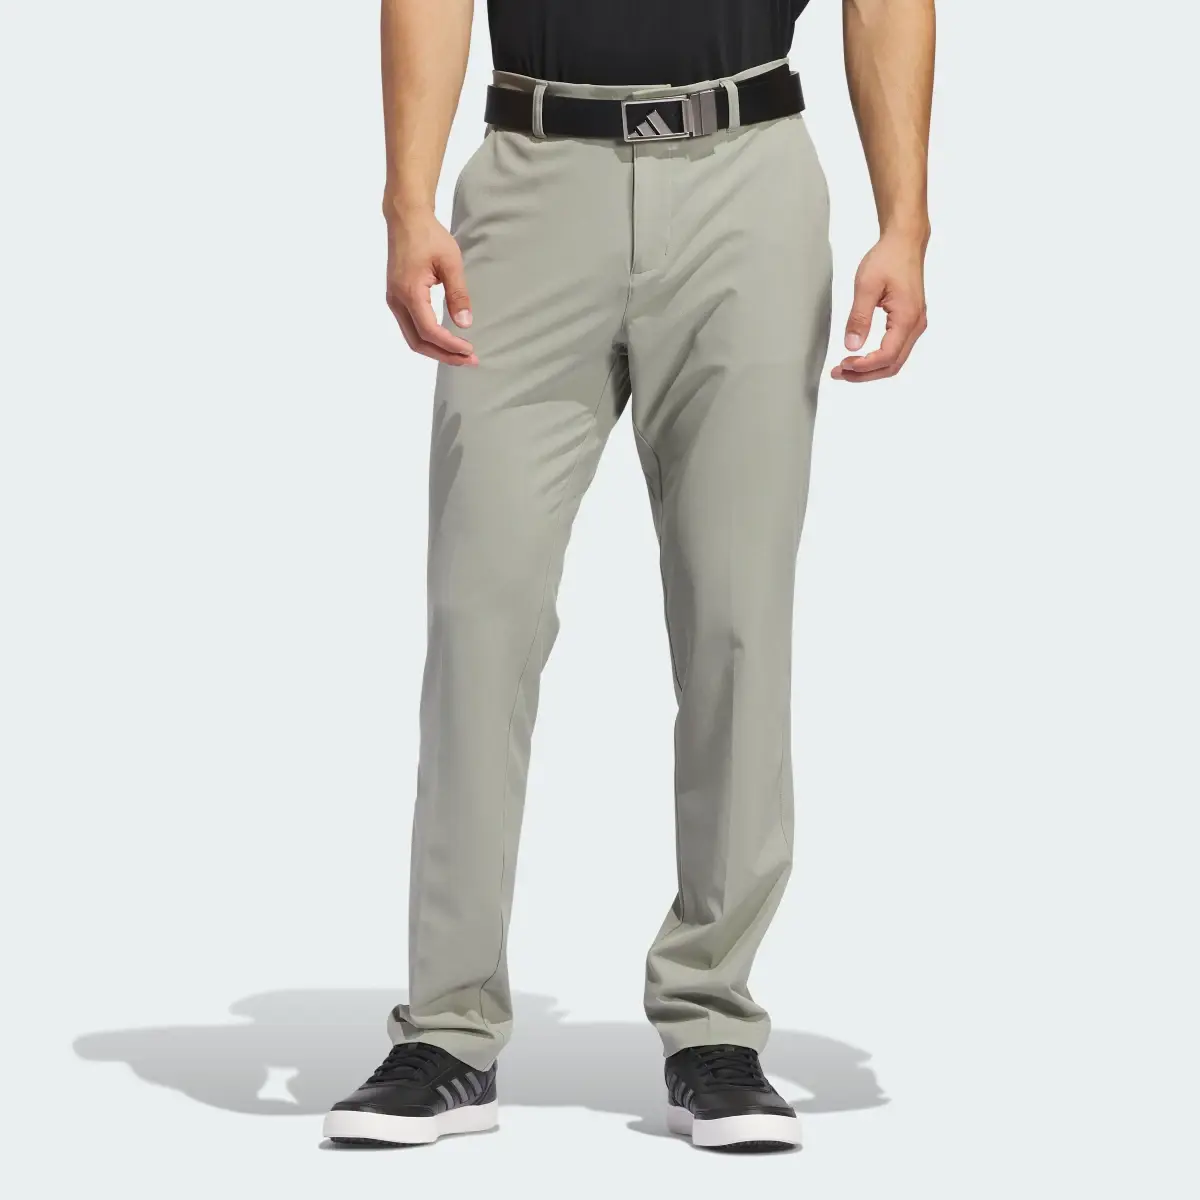 Adidas Ultimate365 Tapered Golf Trousers. 1